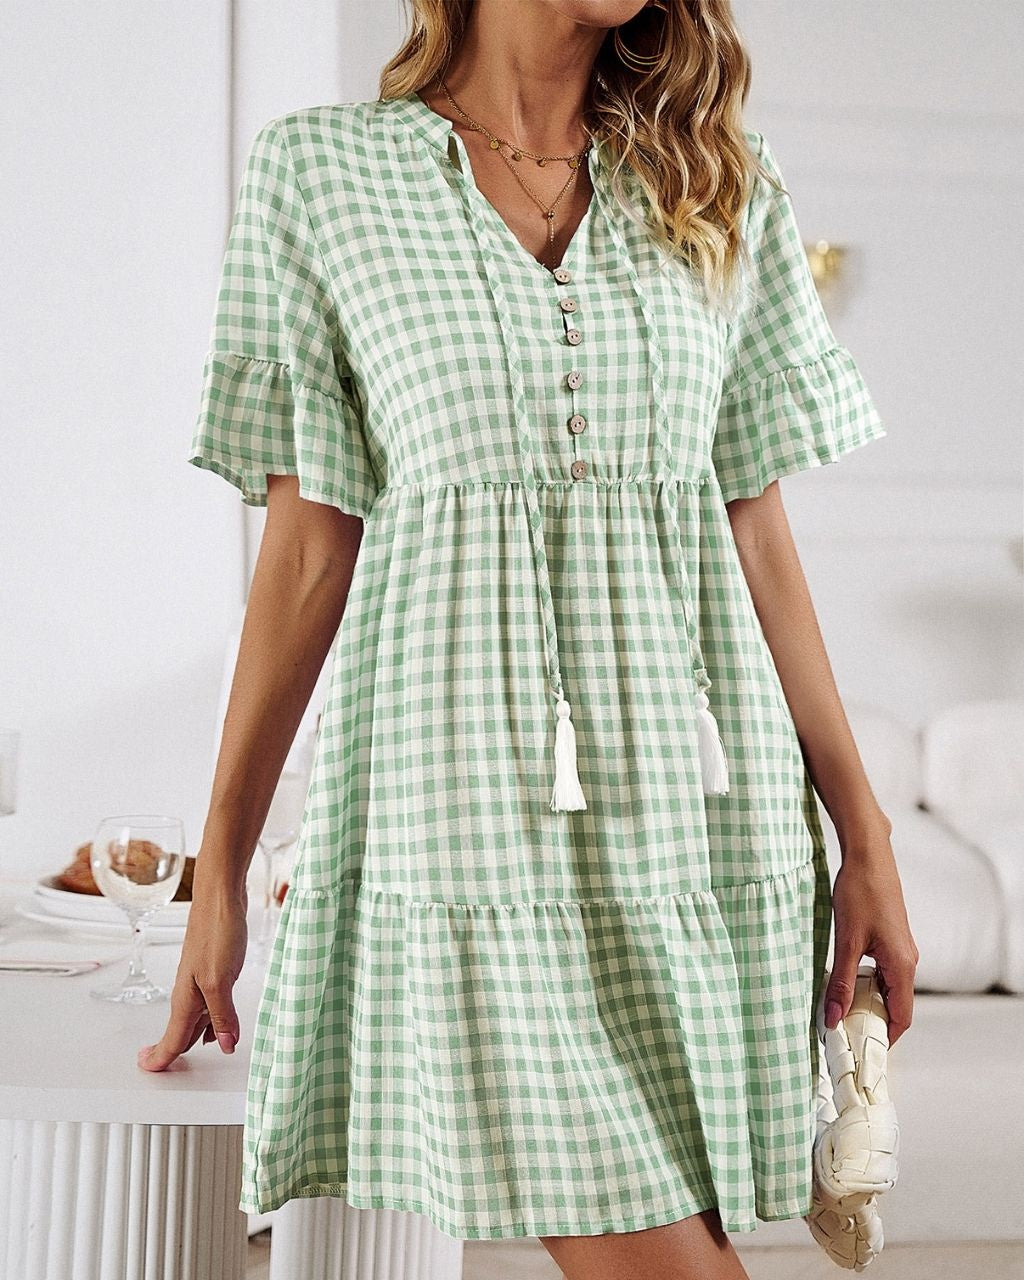 Get ready for an adventure in style with the Lucy Mini Gingham Dress! A fun green color, and the all-over gingham print make it a must-have for your wardrobe. Not to mention the button detail, draw-up-string, tiered style and cap sleeves give it that extra special something! Ready, set, gingham style!